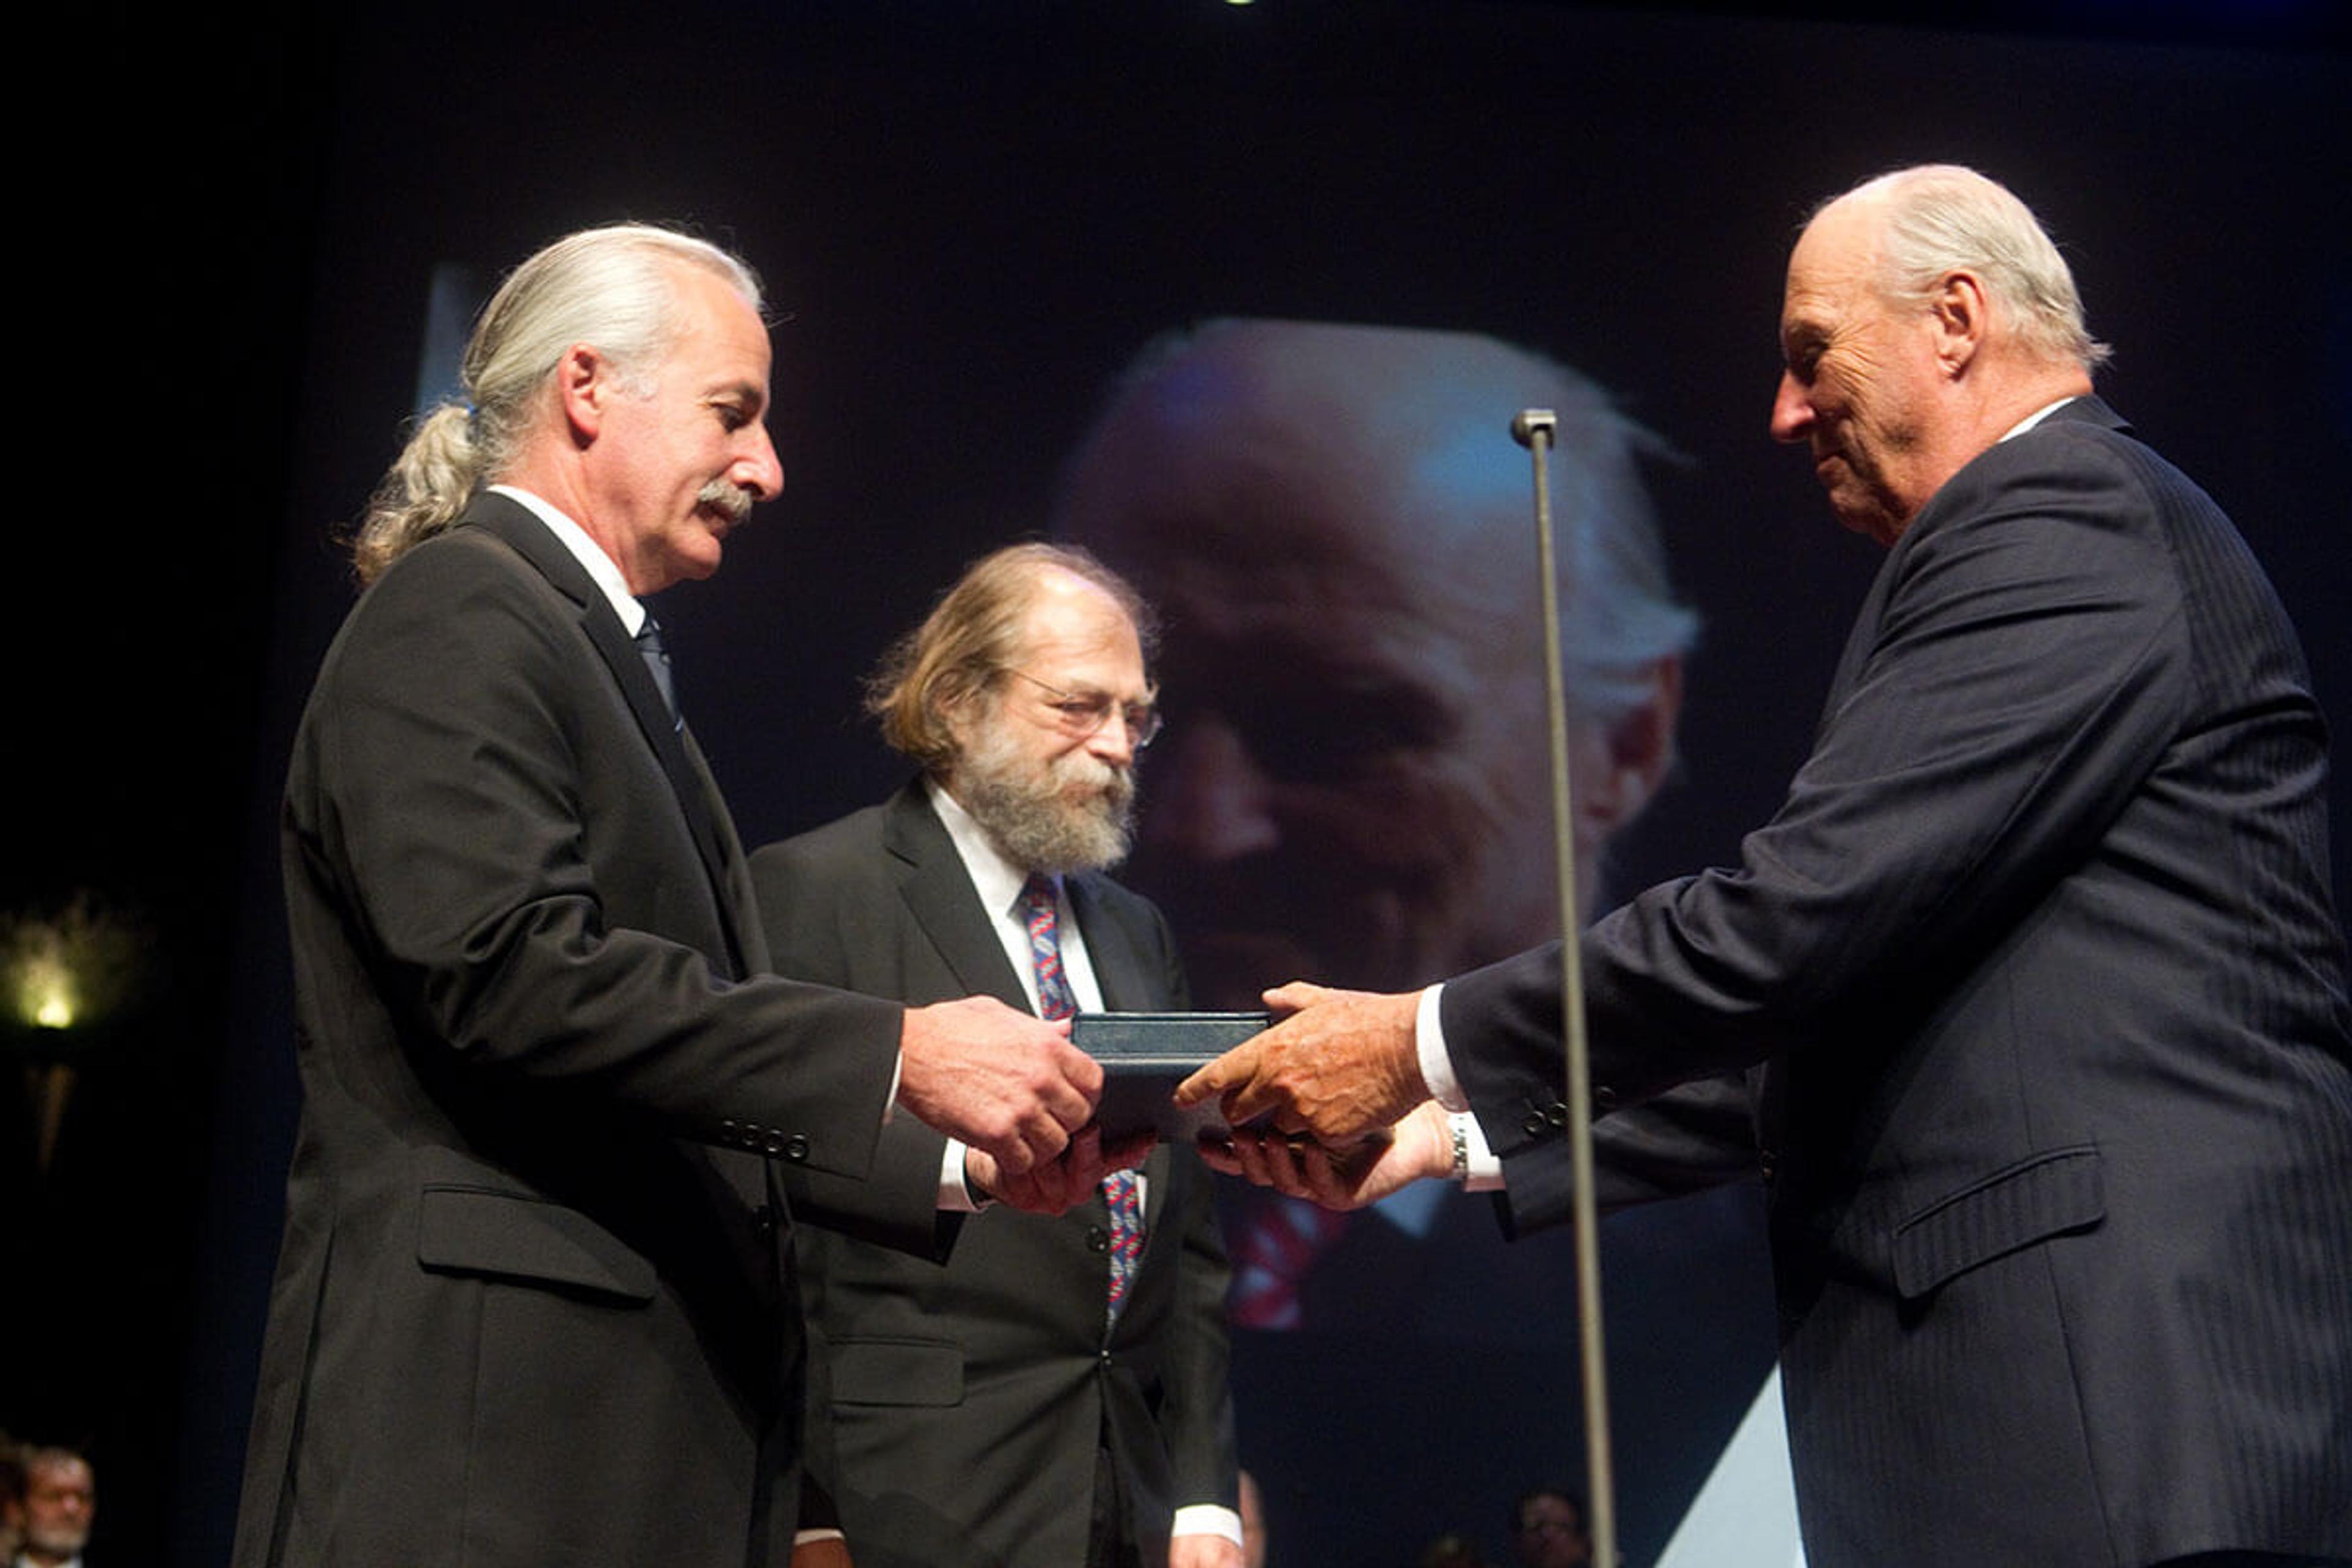 His Royal Highness King Harald of Norway presents the Kavli Prize in Nanoscience.